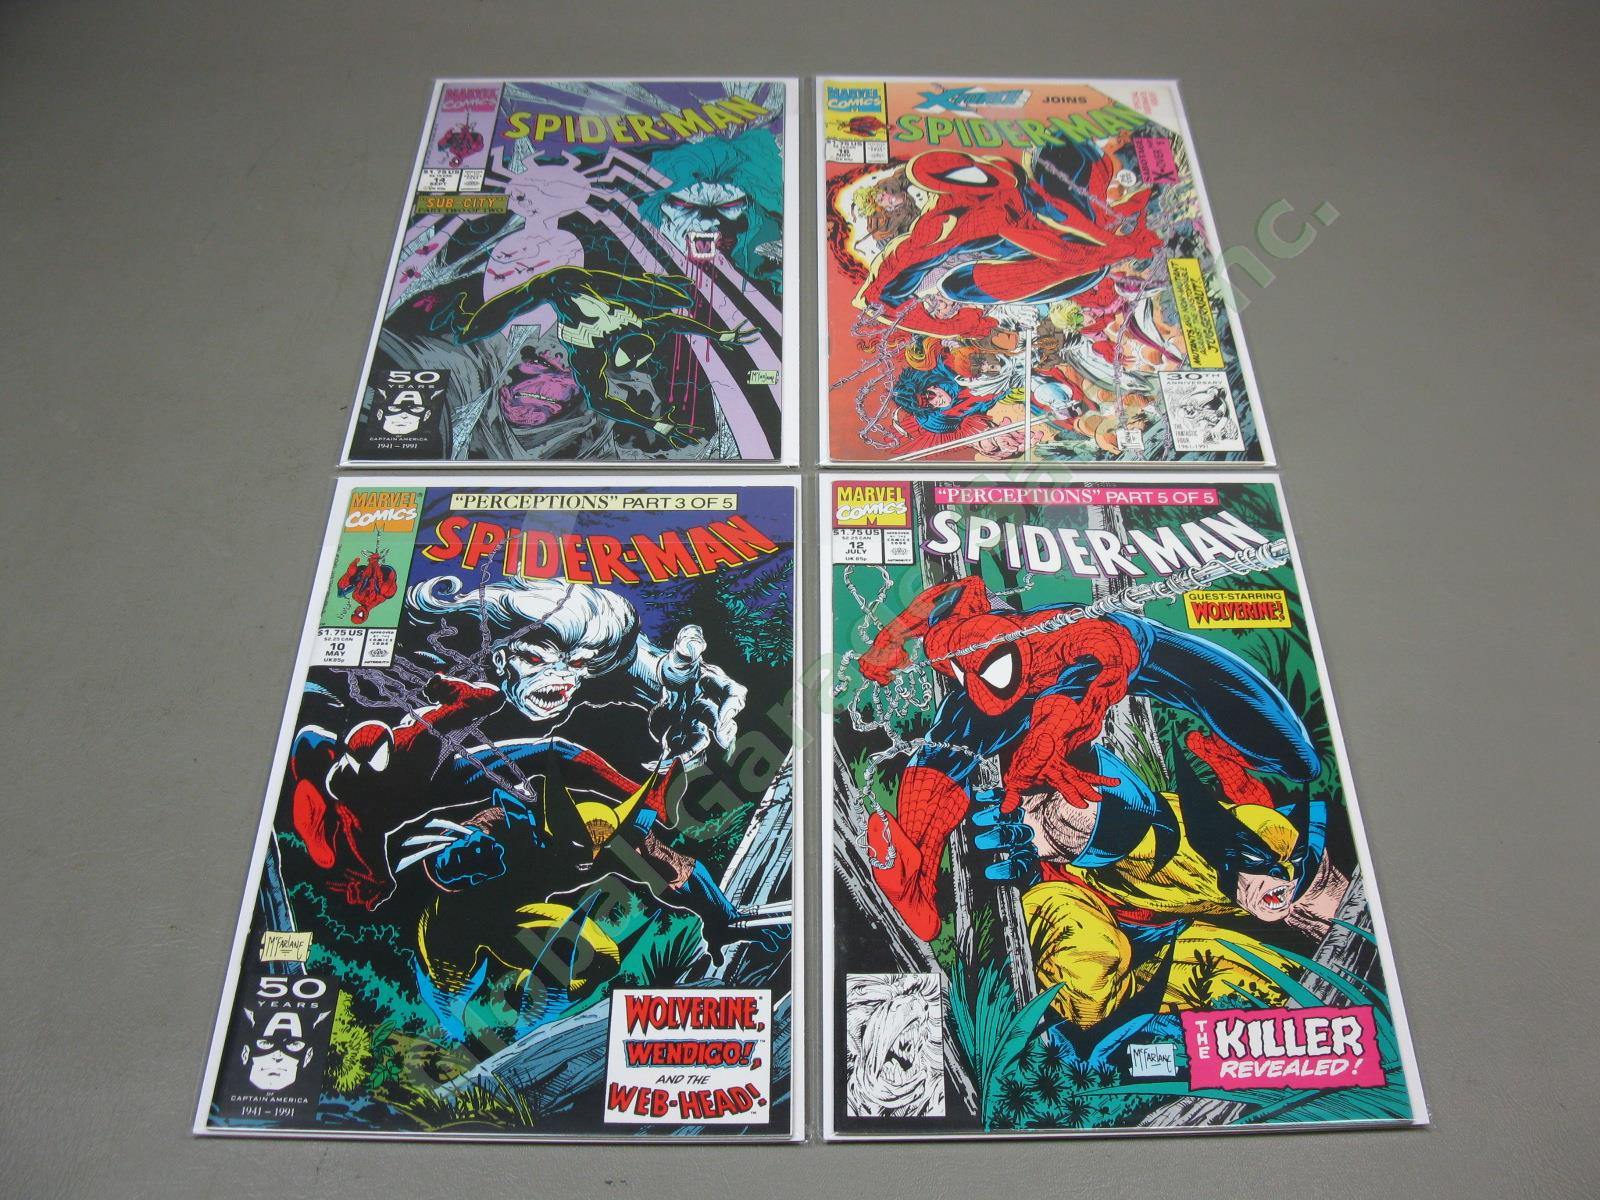 1990 Marvel Comic Spider-Man 1-98 Complete Todd McFarlane Run Lot Set Collection 5